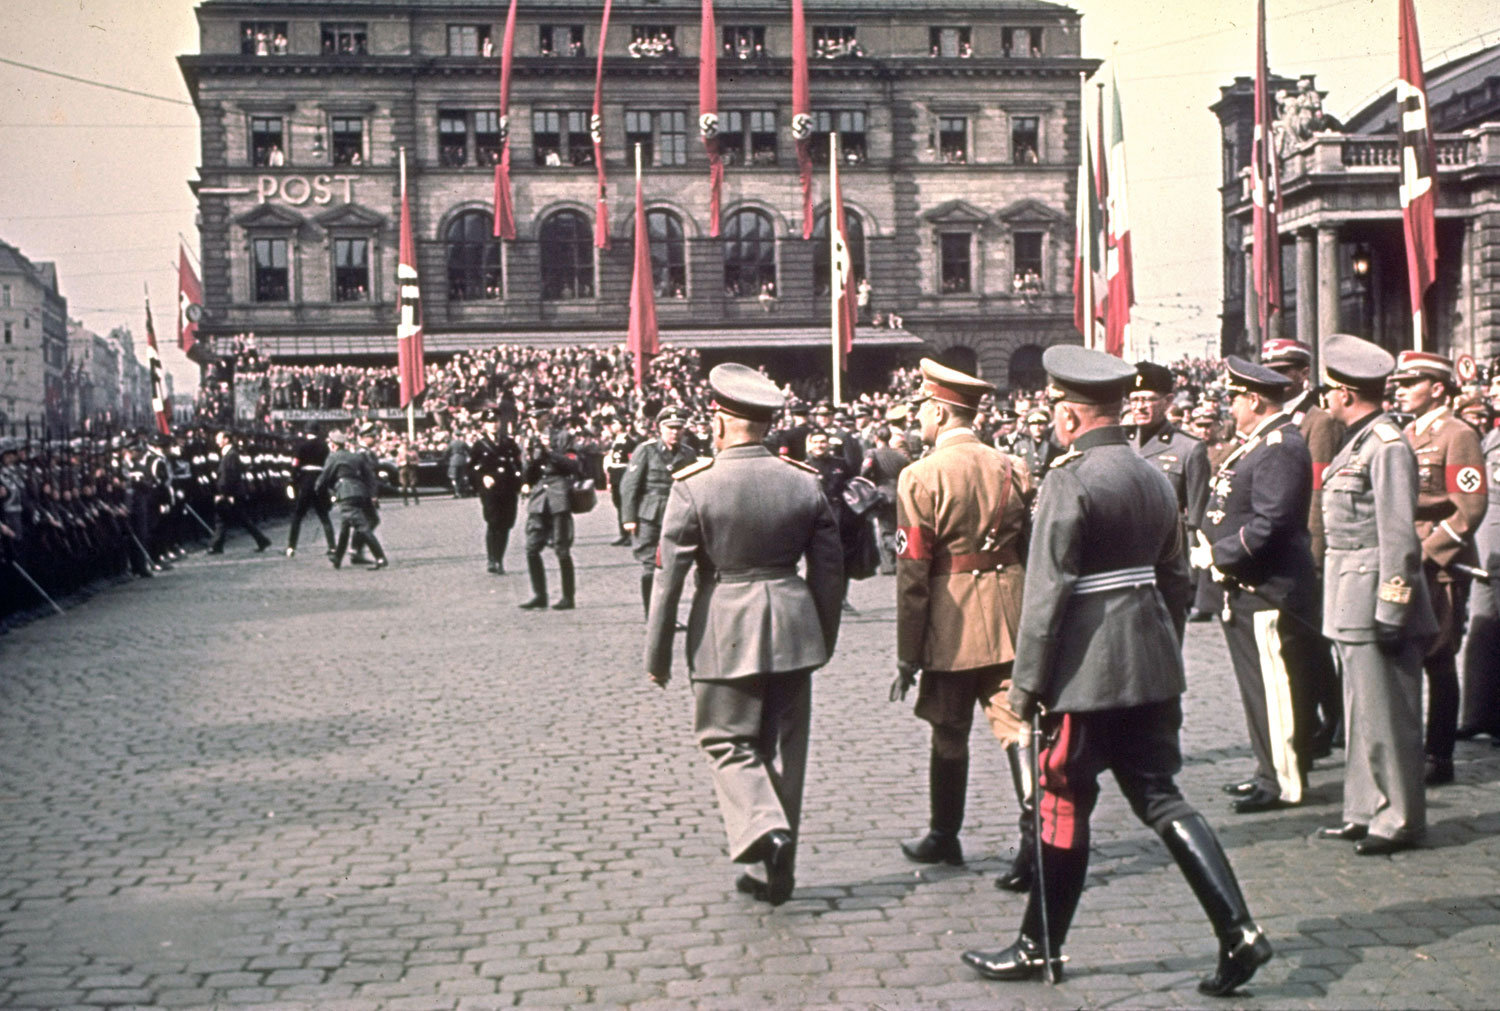 Benito Mussolini and Adolf Hitler in Munich around the time of the September 1938 Munich Conference.